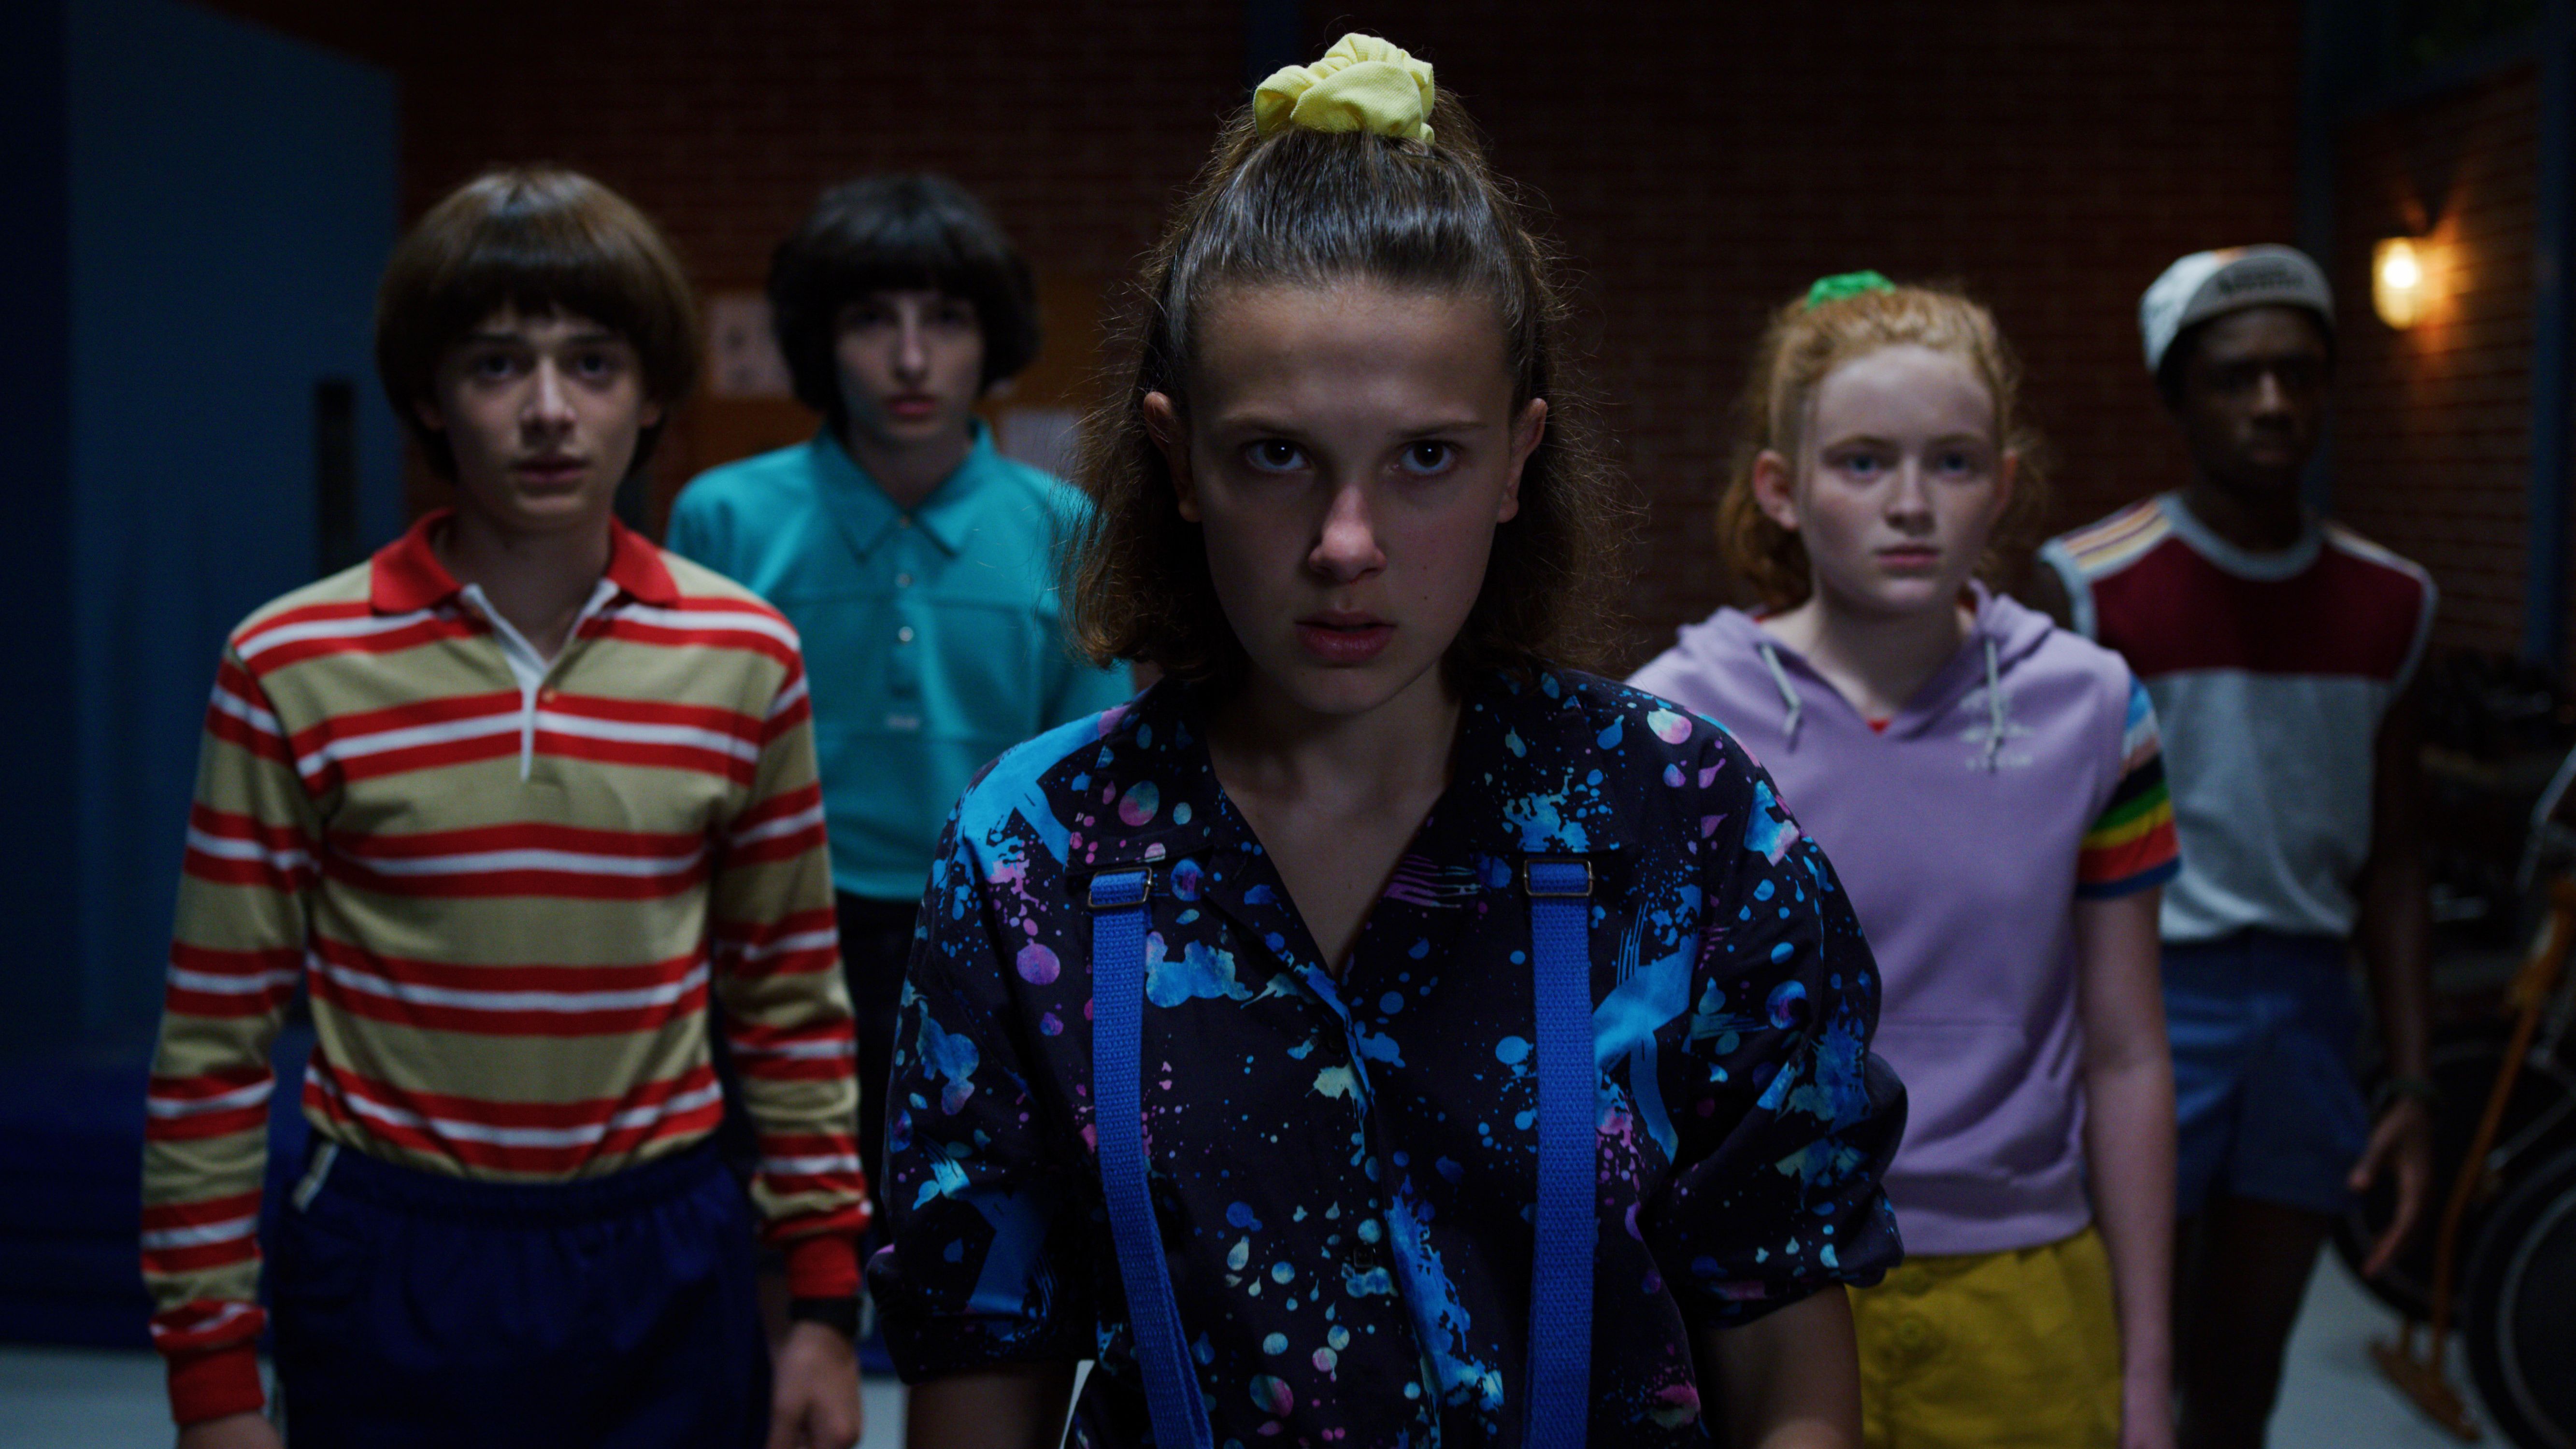 Stranger Things: Where to Watch and Stream Online